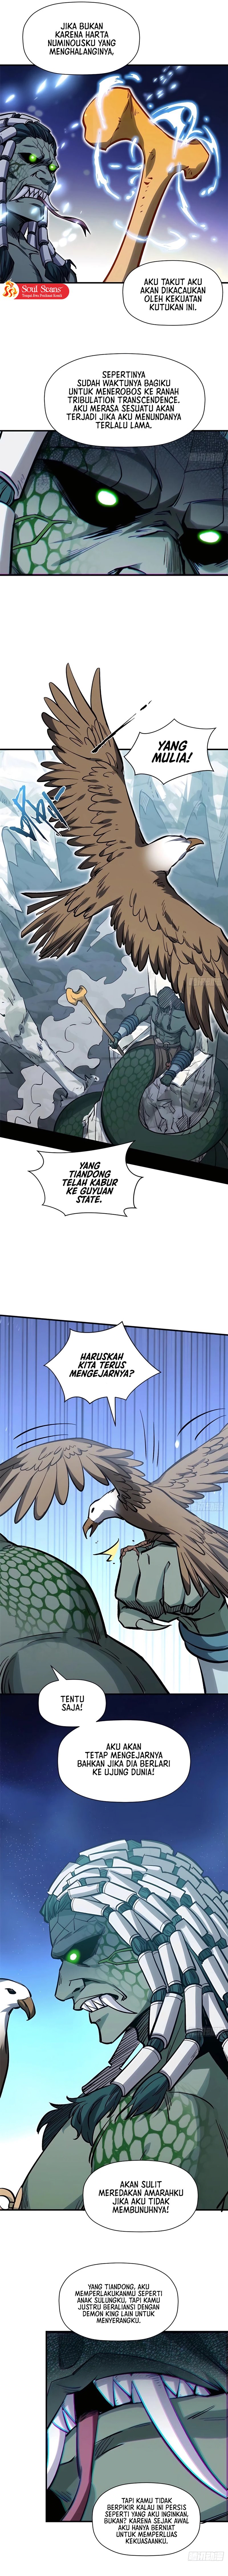 Dilarang COPAS - situs resmi www.mangacanblog.com - Komik top tier providence secretly cultivate for a thousand years 103 - chapter 103 104 Indonesia top tier providence secretly cultivate for a thousand years 103 - chapter 103 Terbaru 5|Baca Manga Komik Indonesia|Mangacan